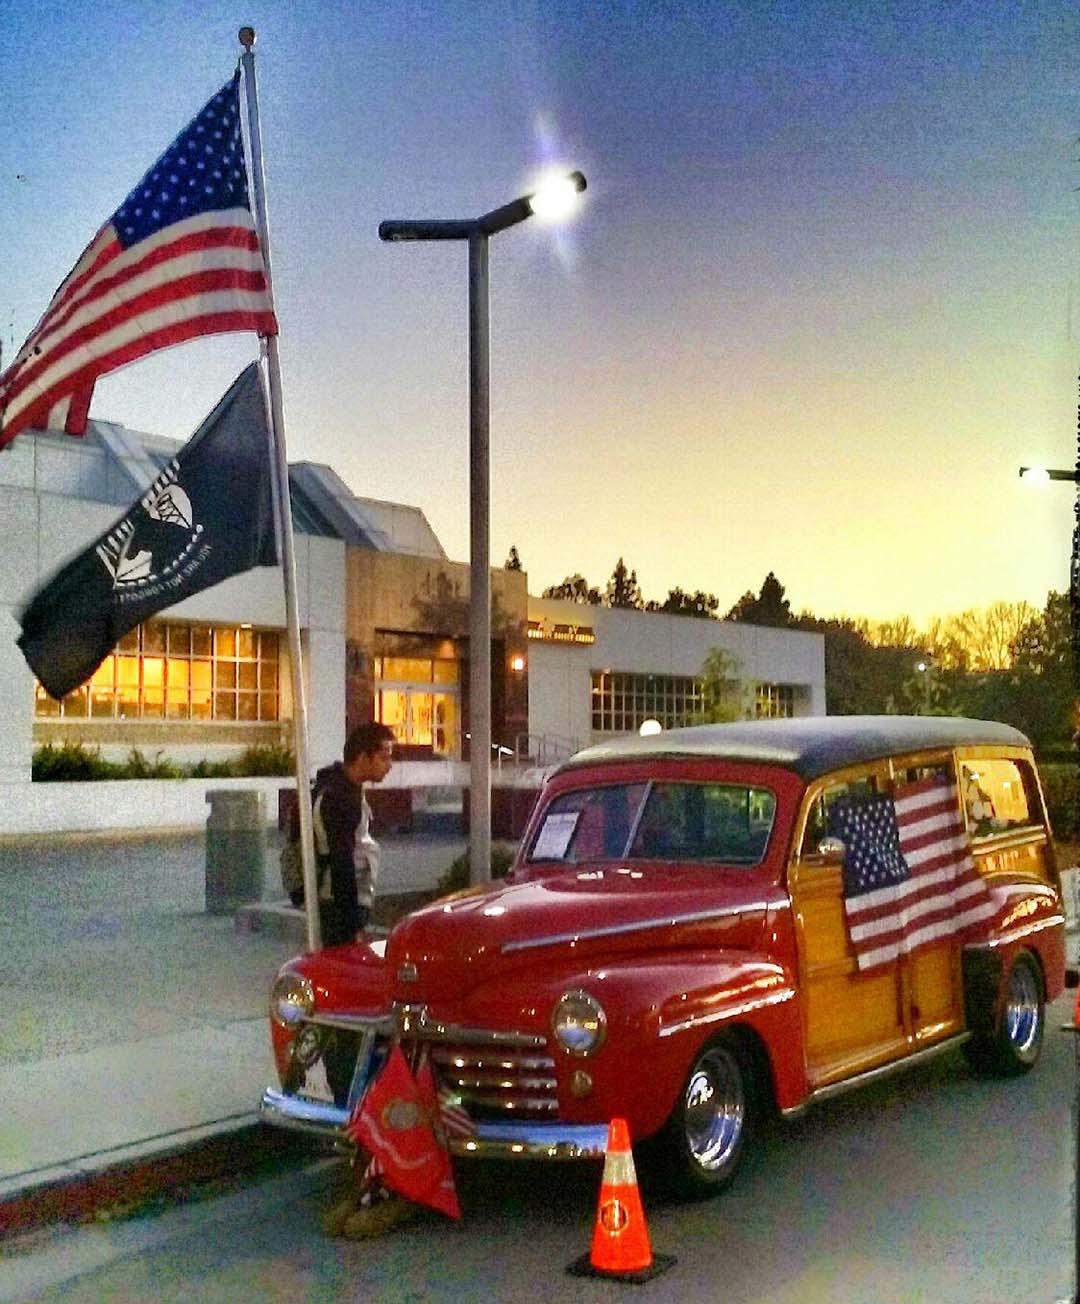 Det. Member Mickey Christianson’s Woodie at Several Outings